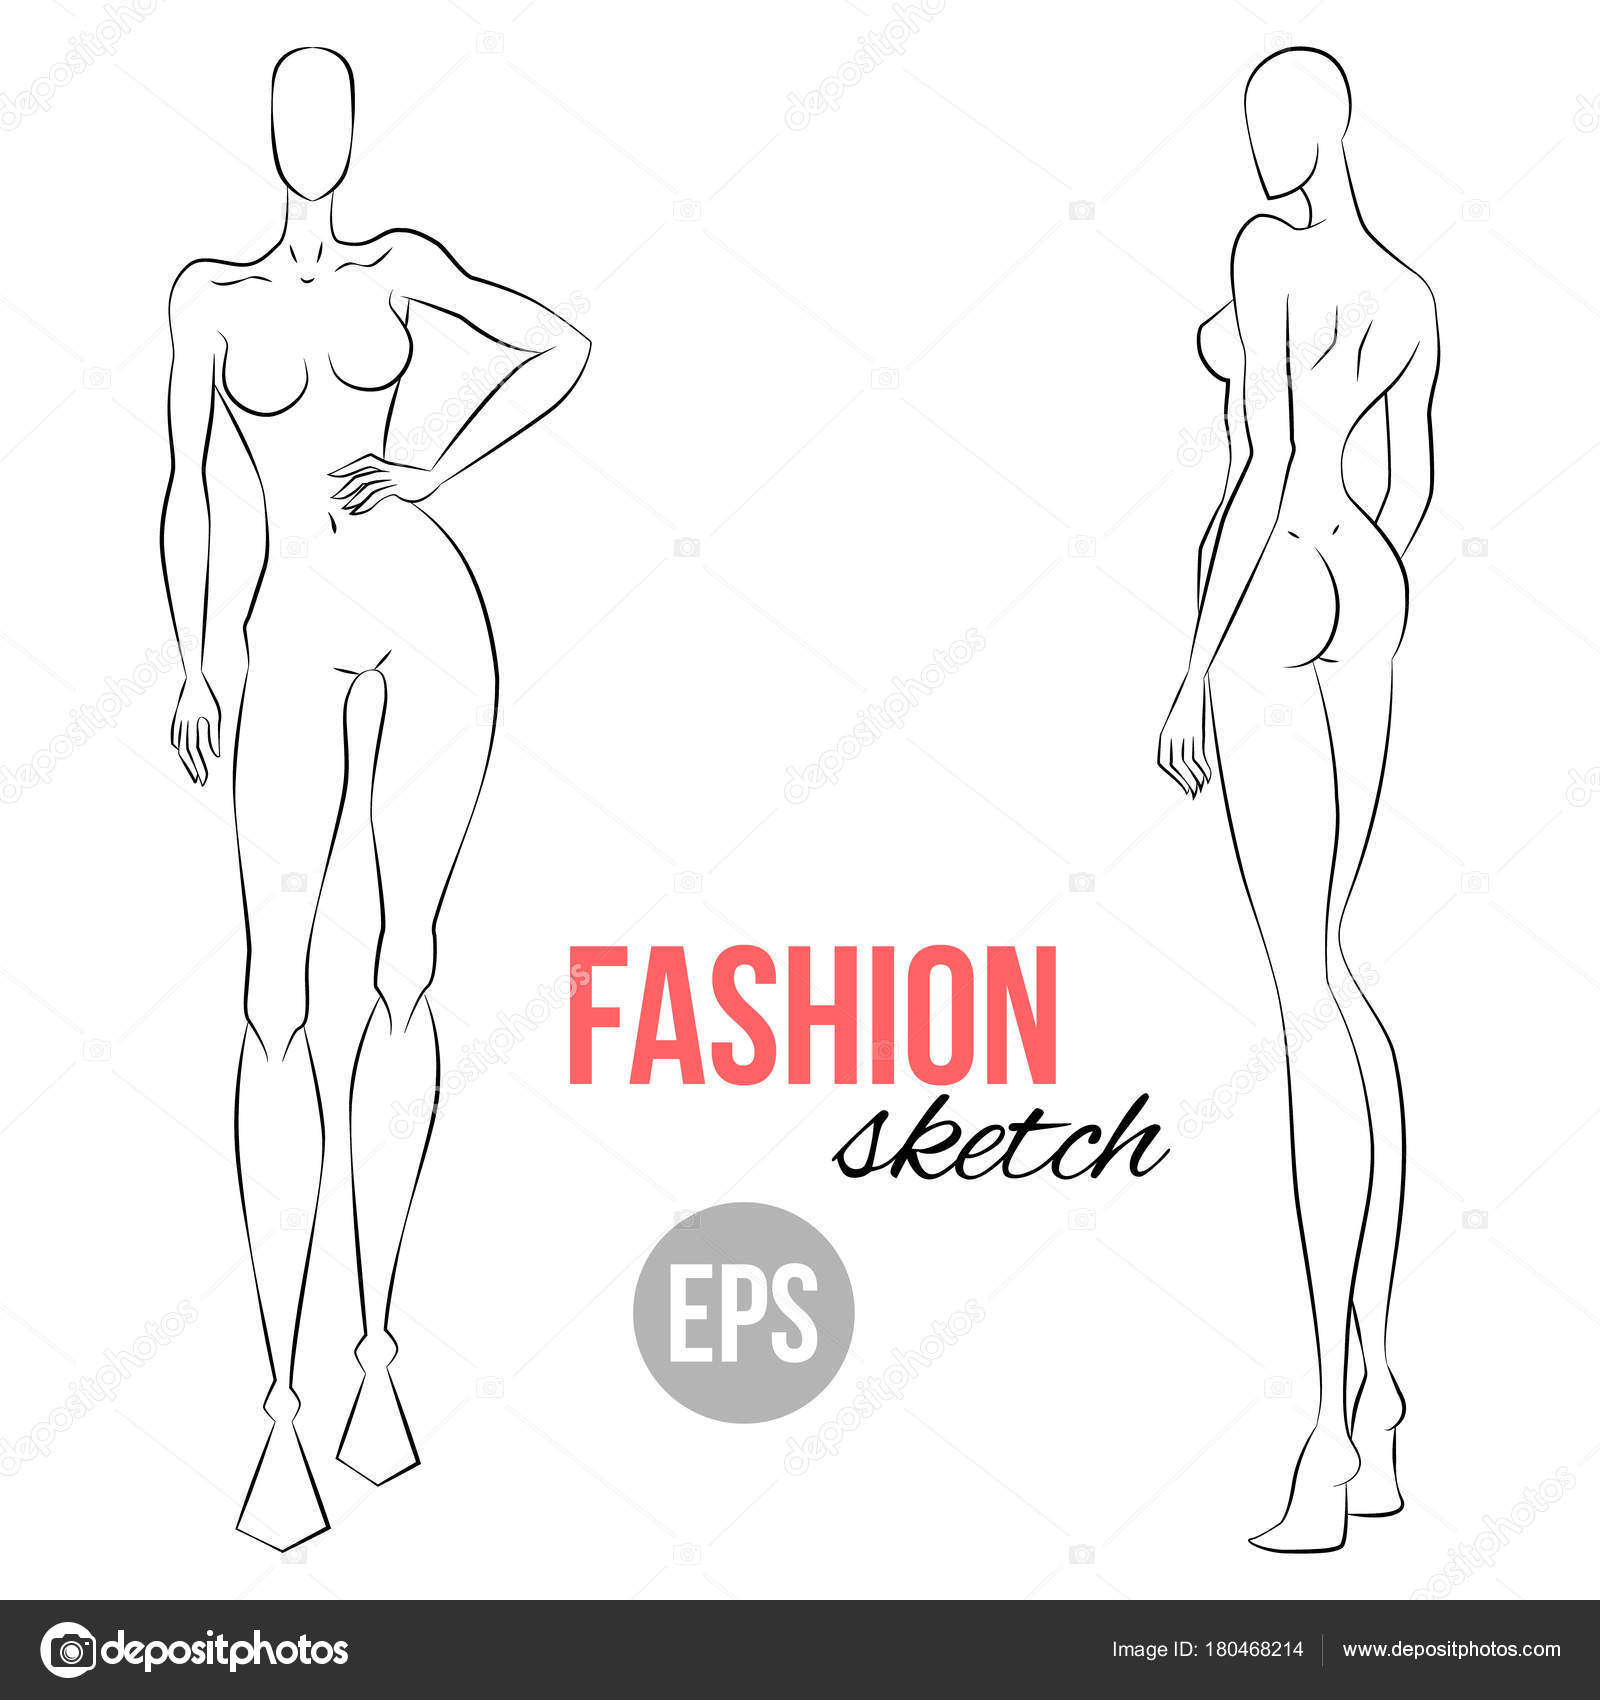 how to draw different fashion figure poses | tutorial - YouTube